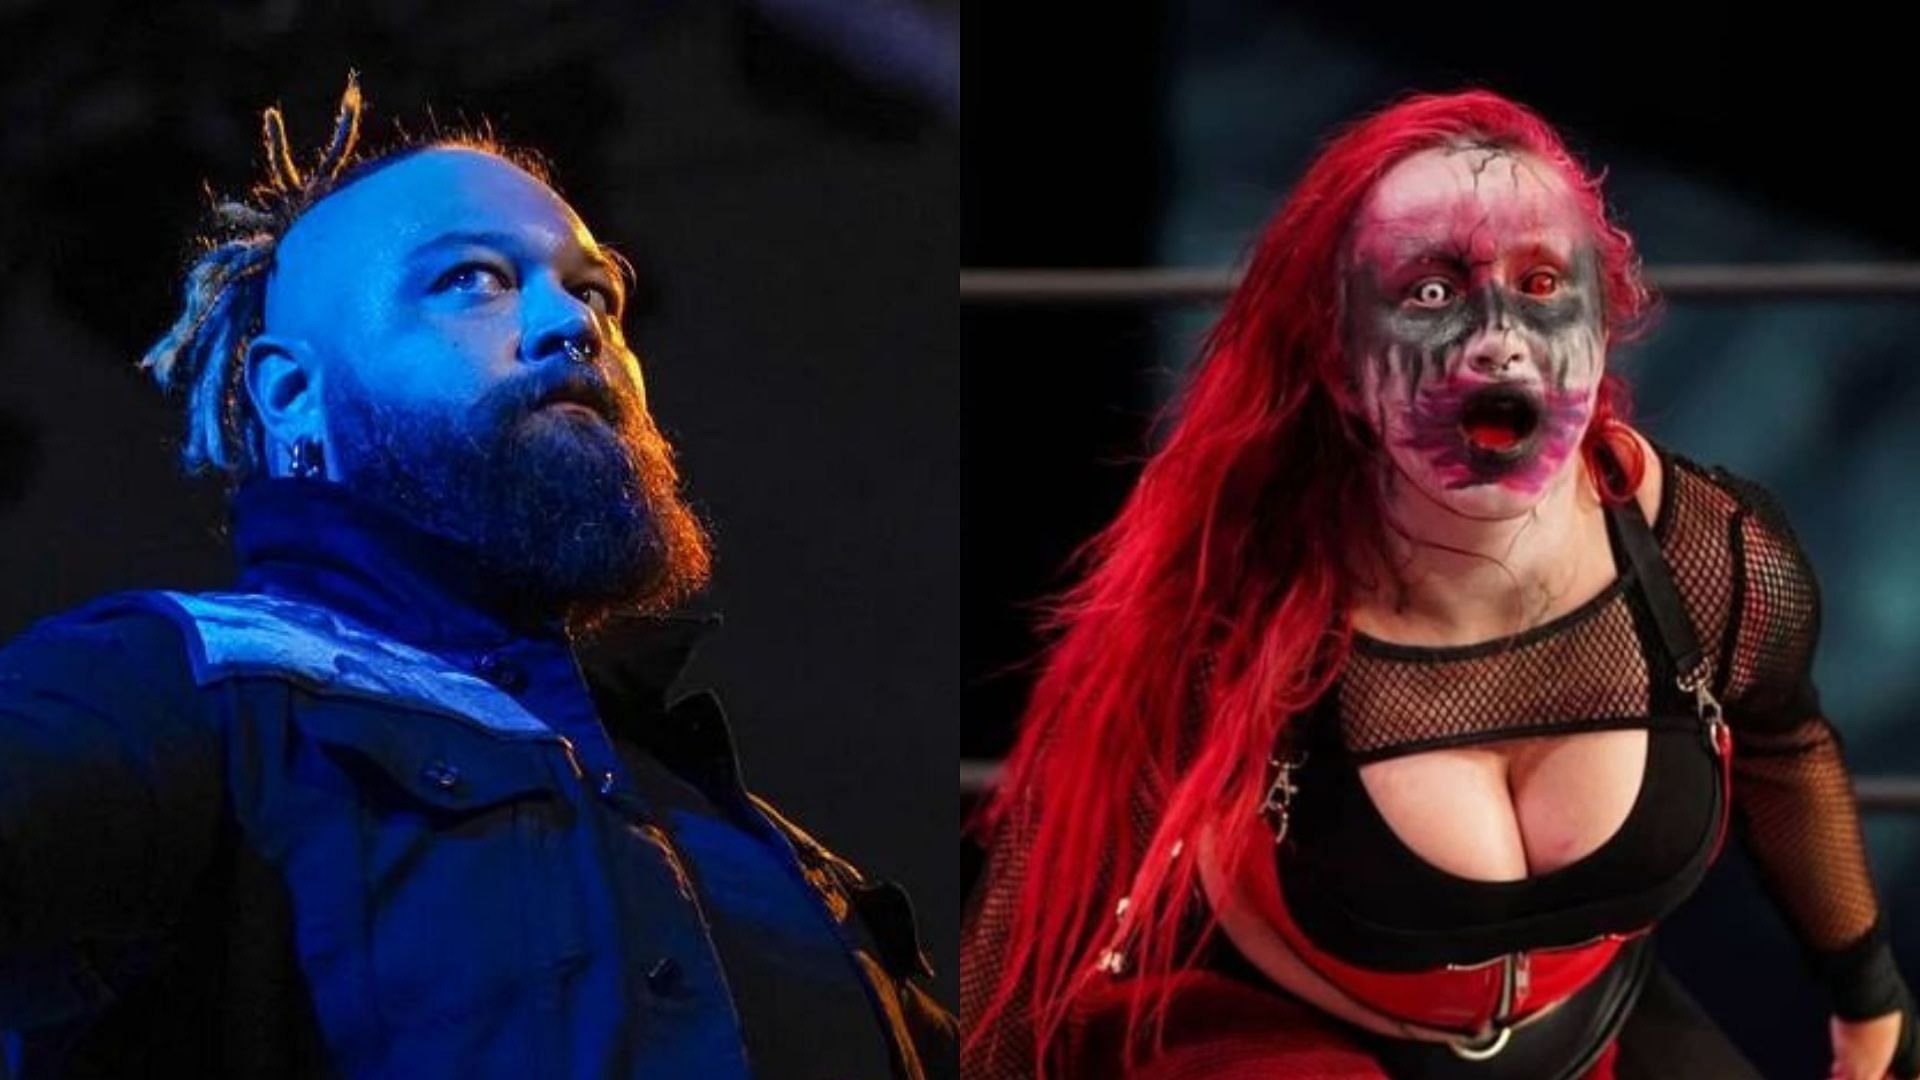 Which character is the most terrifying in wrestling today?